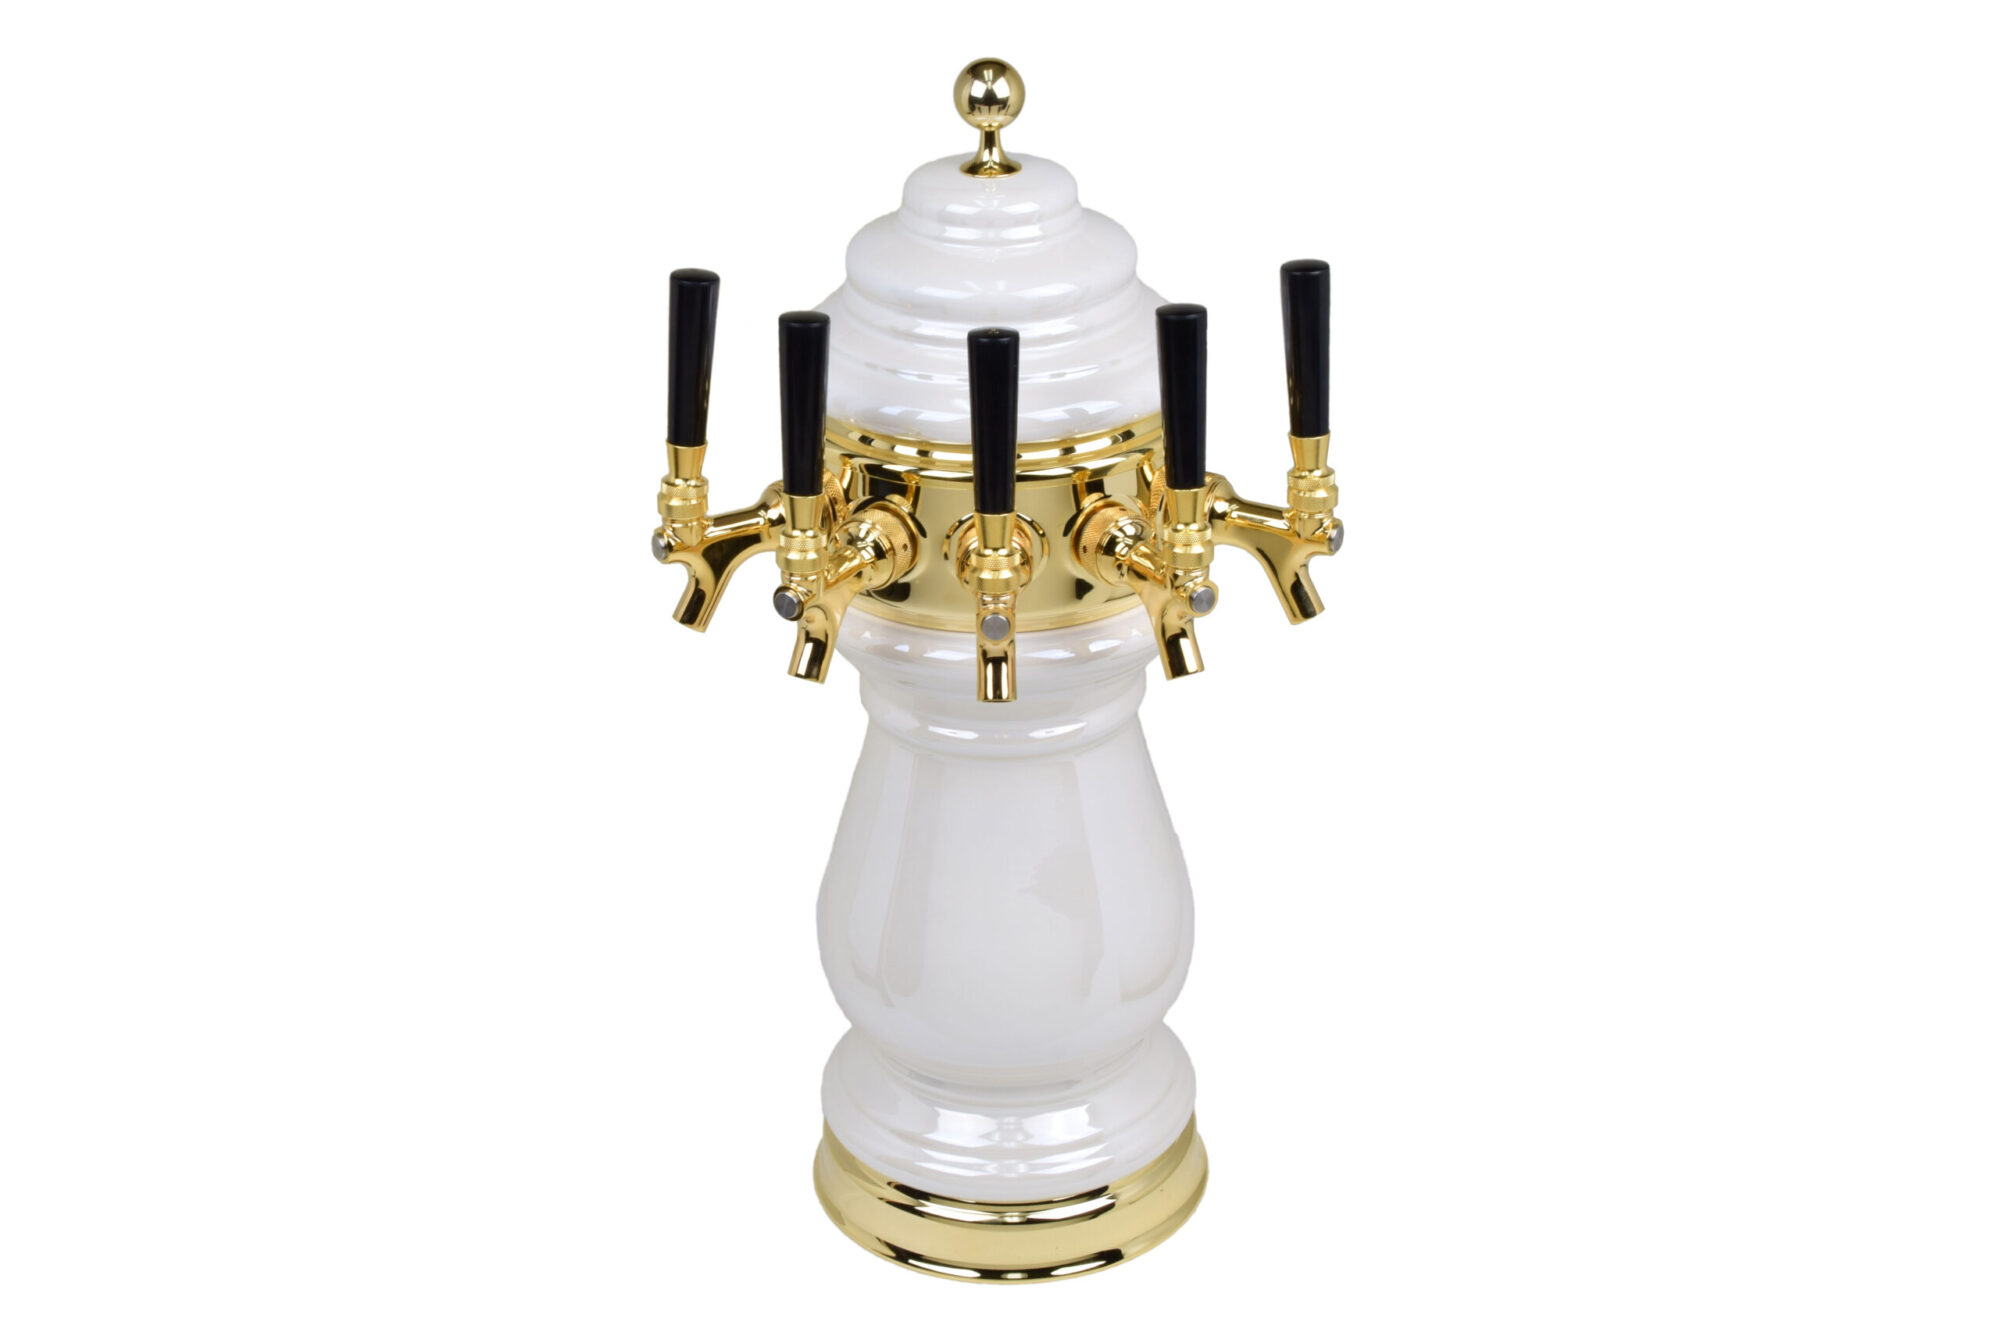 882B-5 Five Faucet Ceramic Tower with PVD Brass Hardware - Available in 5 Colors - Shown in Pearl White